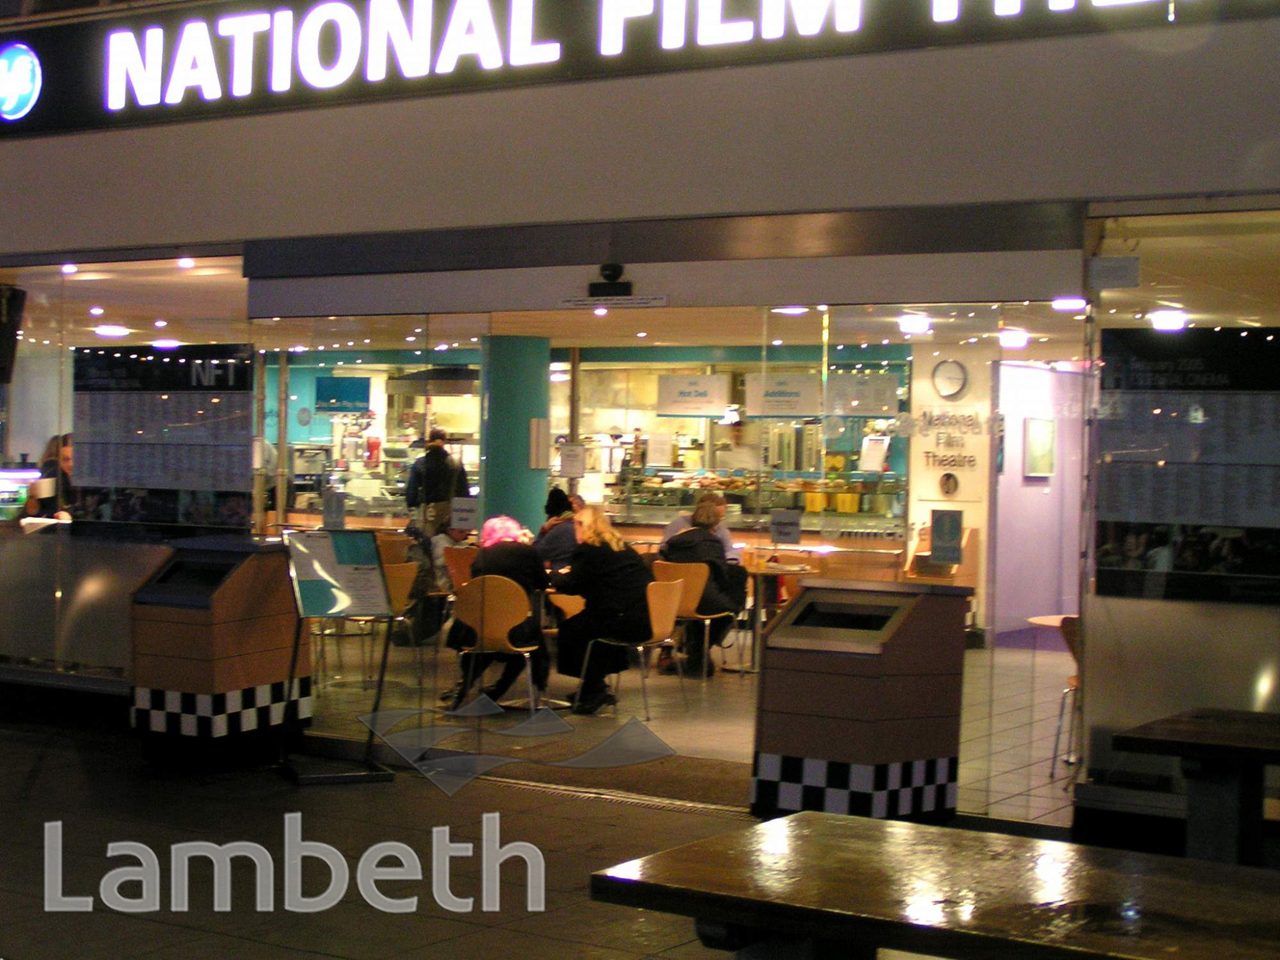 NATIONAL FILM THEATRE CAFE, SOUTH BANK